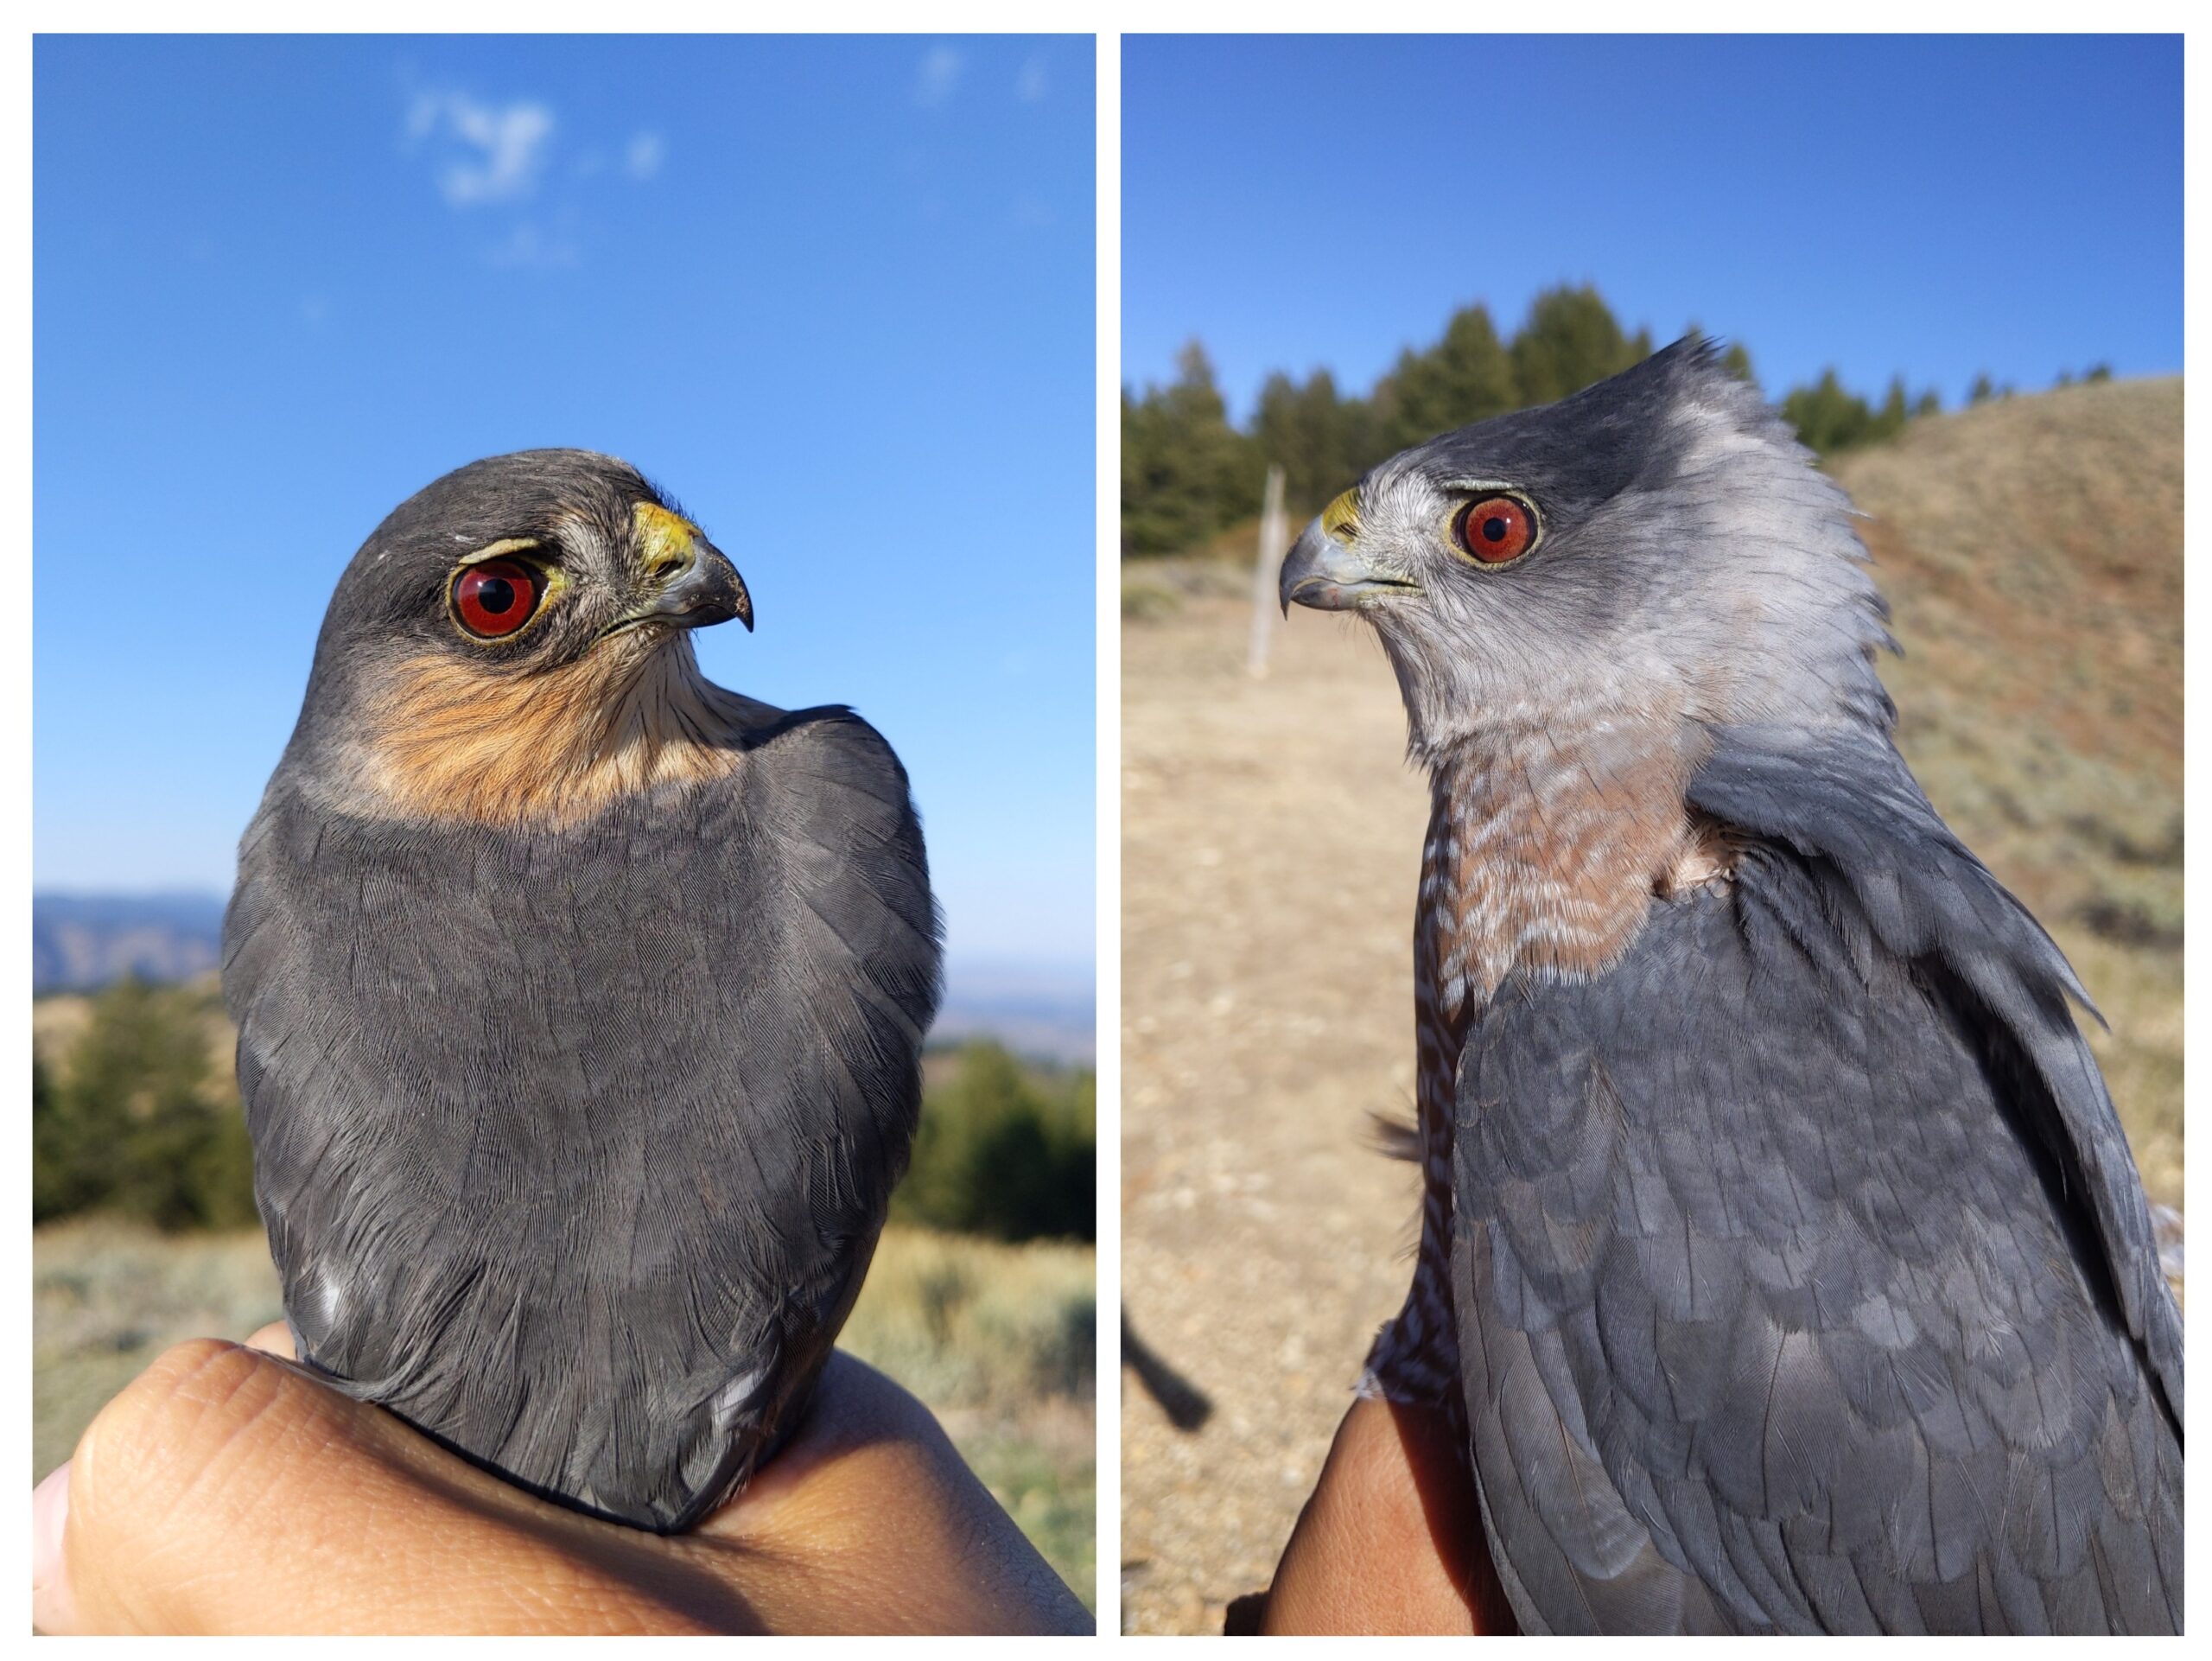 A side-by-side comparison of an adult male Sharp-shinned Hawk on the left, and an adult male Cooper's Hawk on the right. The plumage and form of both birds is extremely similar. Both have dark orangey eyes, and blueish grey feathers. The sharp-shinned hawk is smaller with a round head. The Cooper's Hawk is larger with a very squared-off head. There is blue sky and green trees in the background.